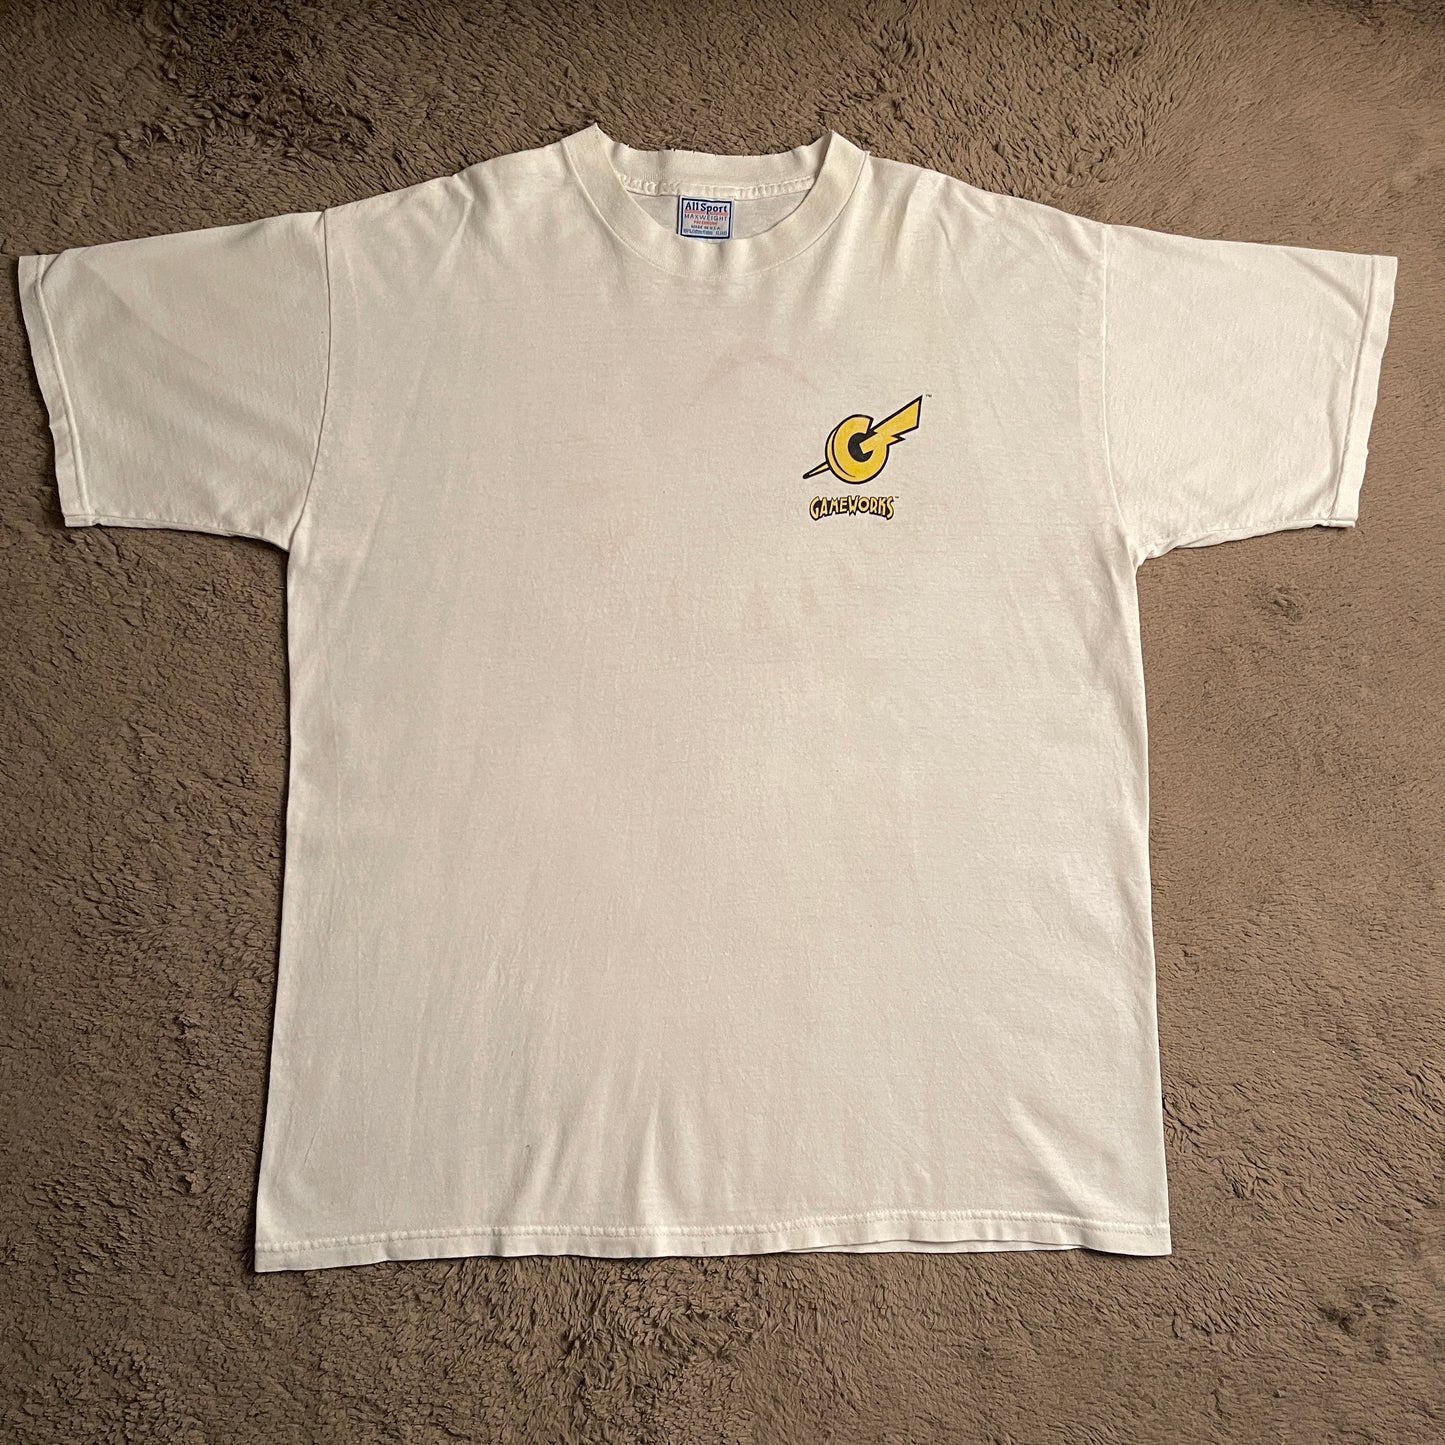 Gameworks "Hour of Power" Tee (XL)